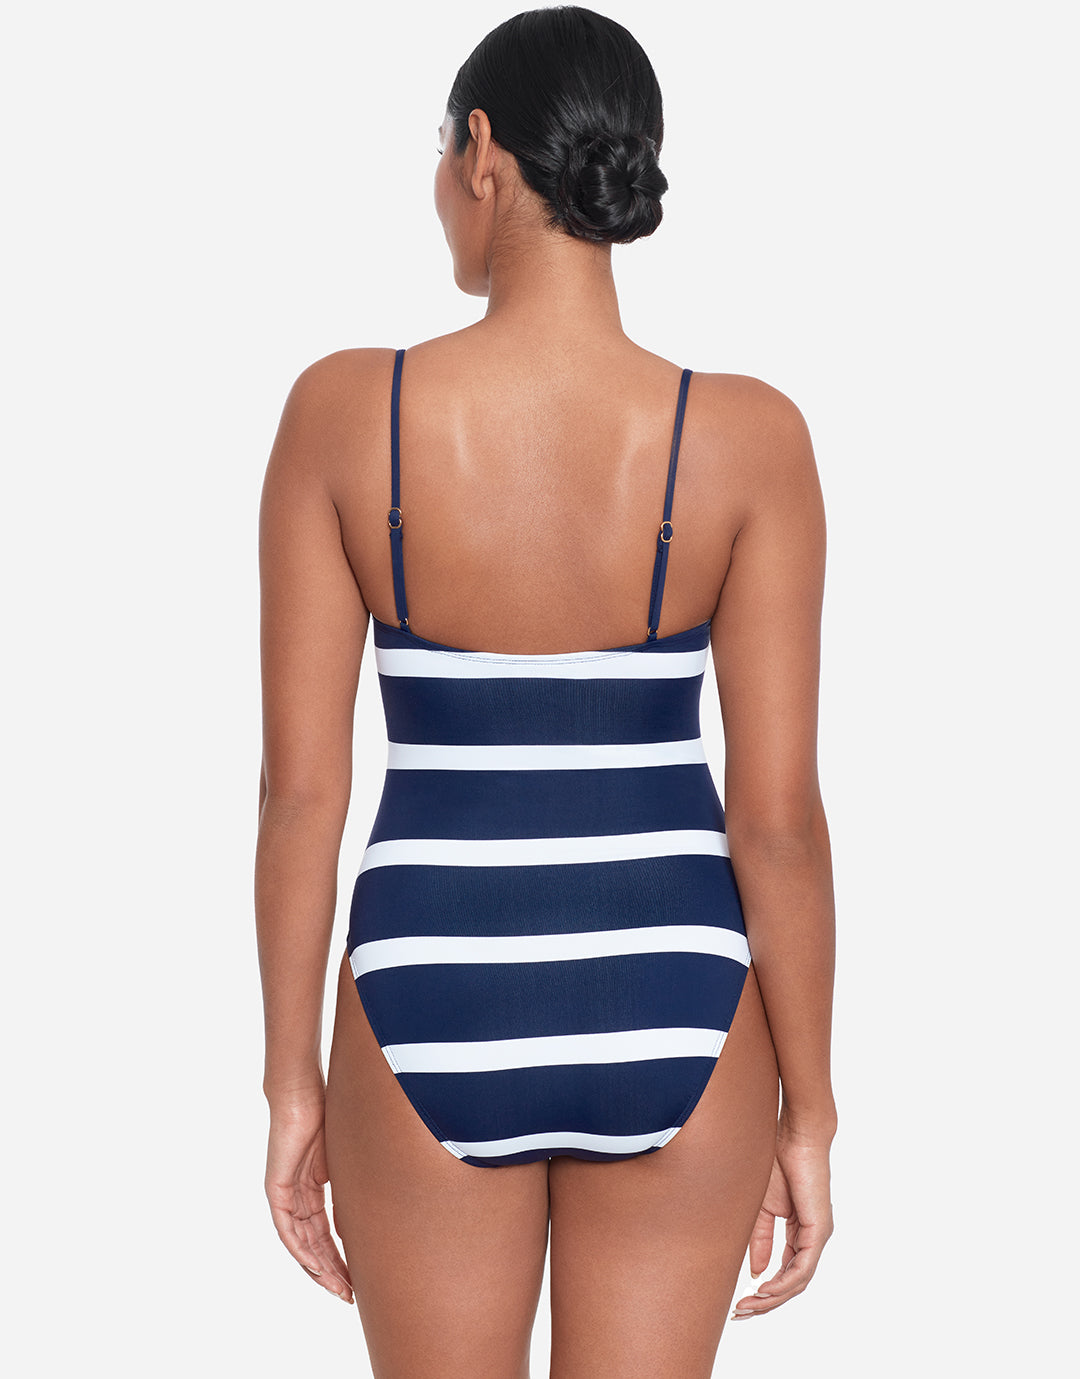 Mariner Stripe Embroidered Square Neck Swimsuit - Navy and White - Simply Beach UK